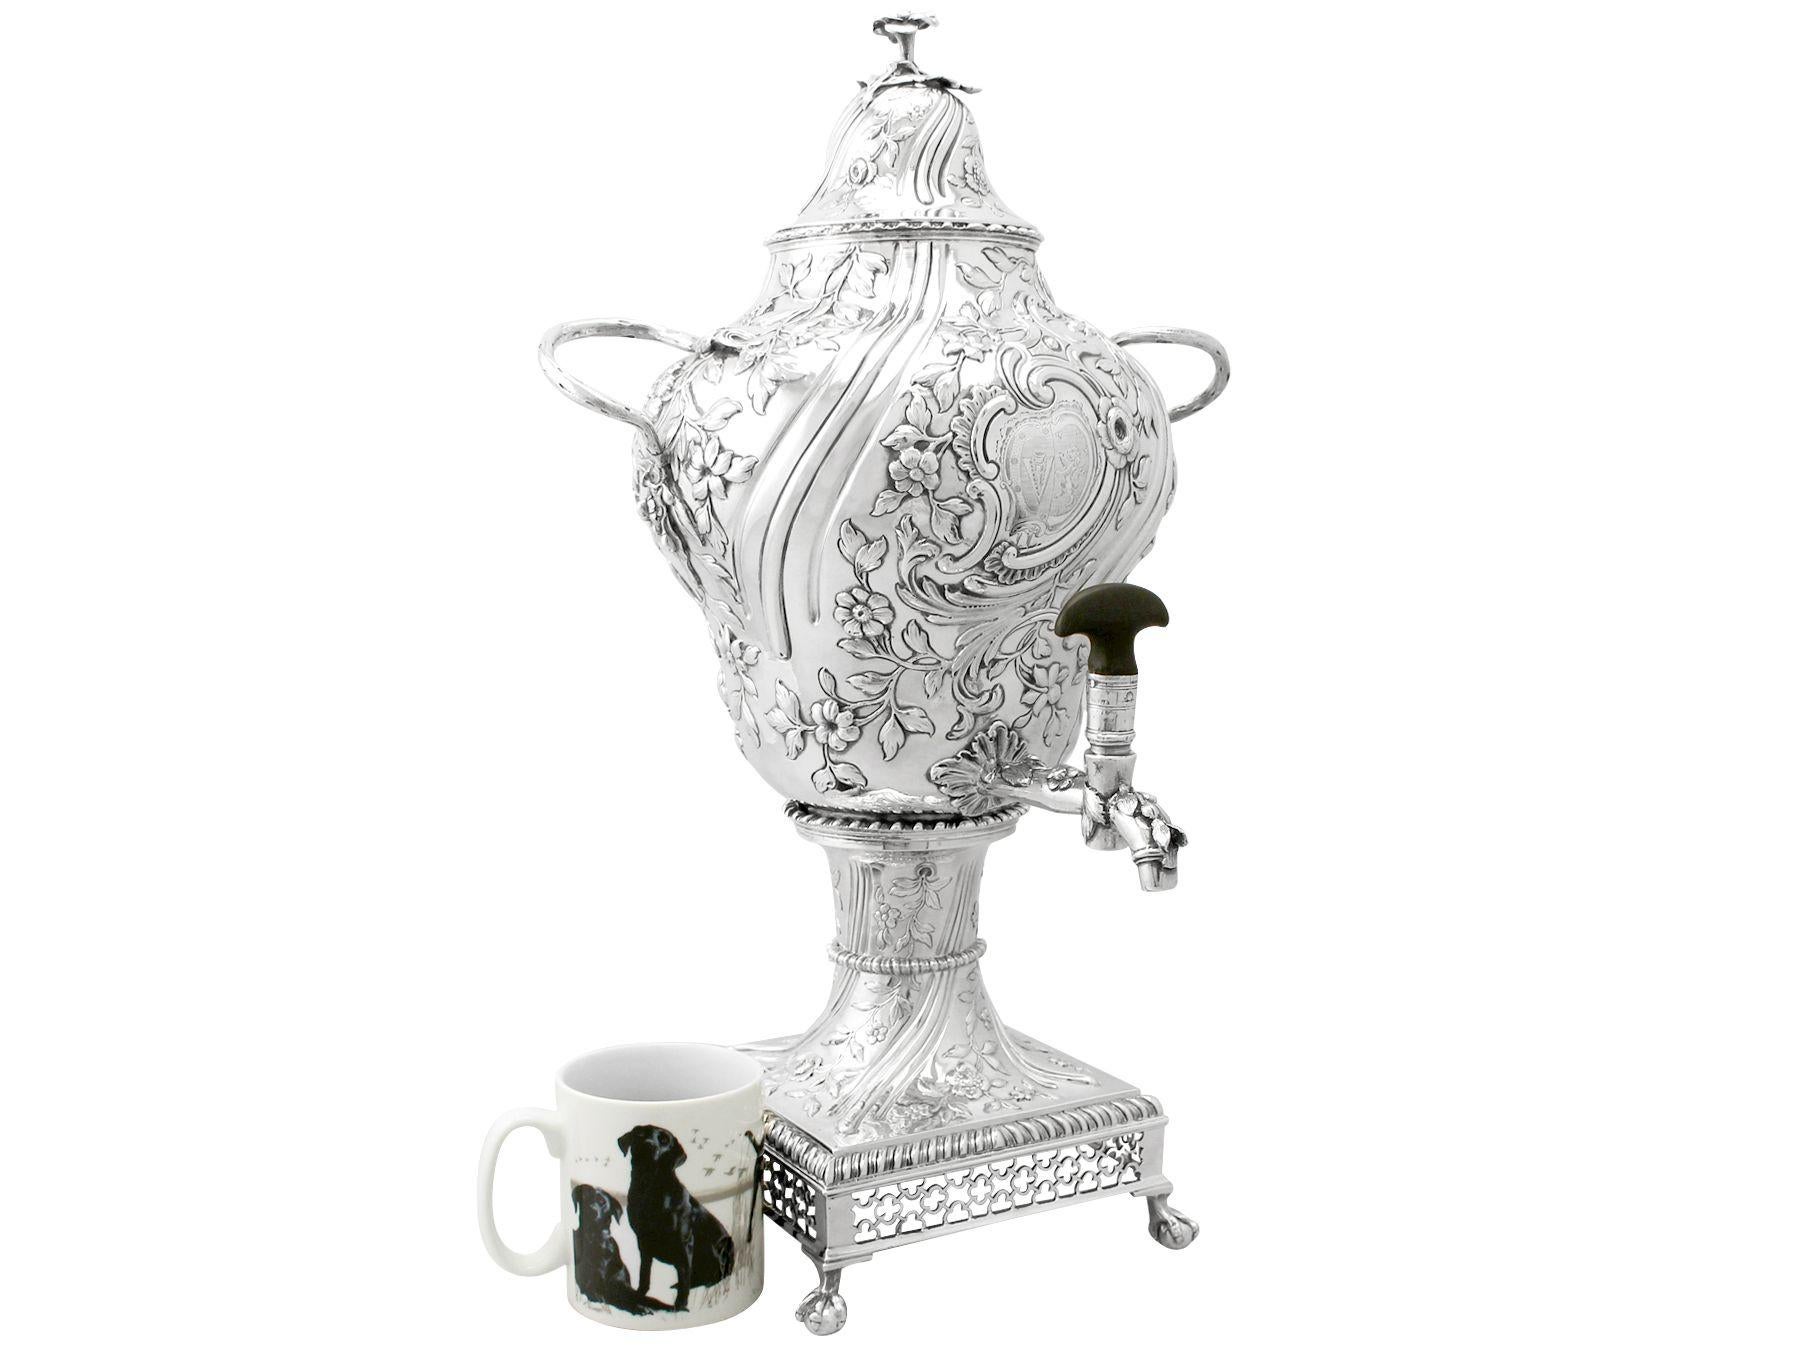 A magnificent, fine and impressive antique George III English sterling silver samovar made in the Regency style, an addition to our Georgian silver teaware collection

This magnificent antique George III sterling silver samovar has a circular